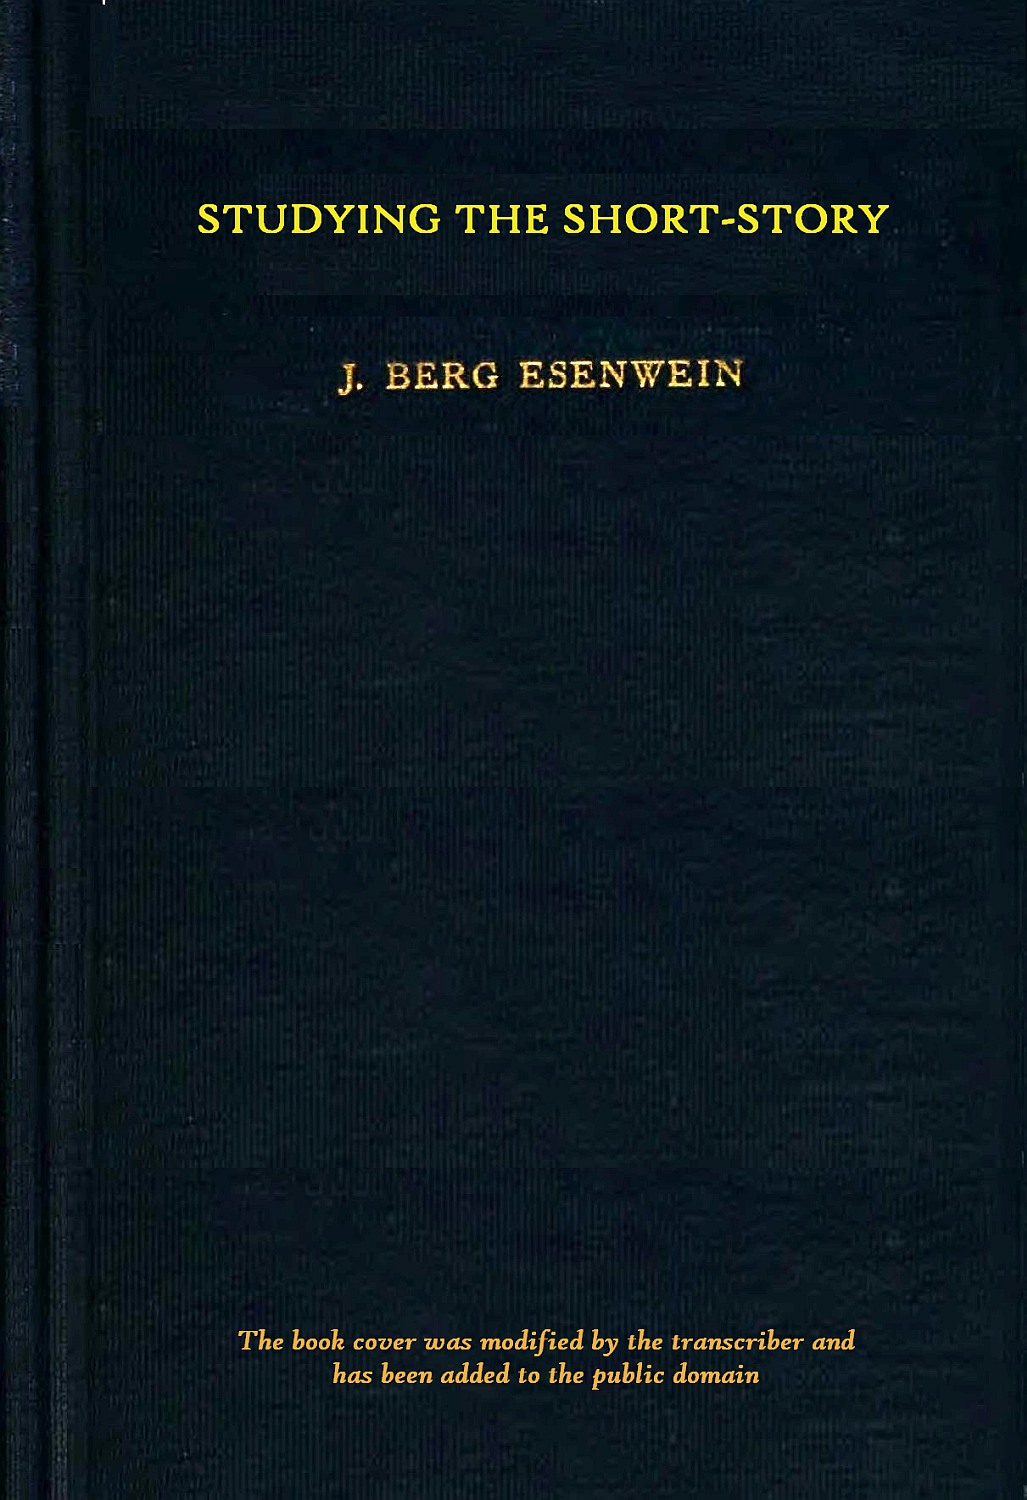 Studying the Short-story, by J. Berg Esenwein, A.M. A Project Gutenberg  eBook